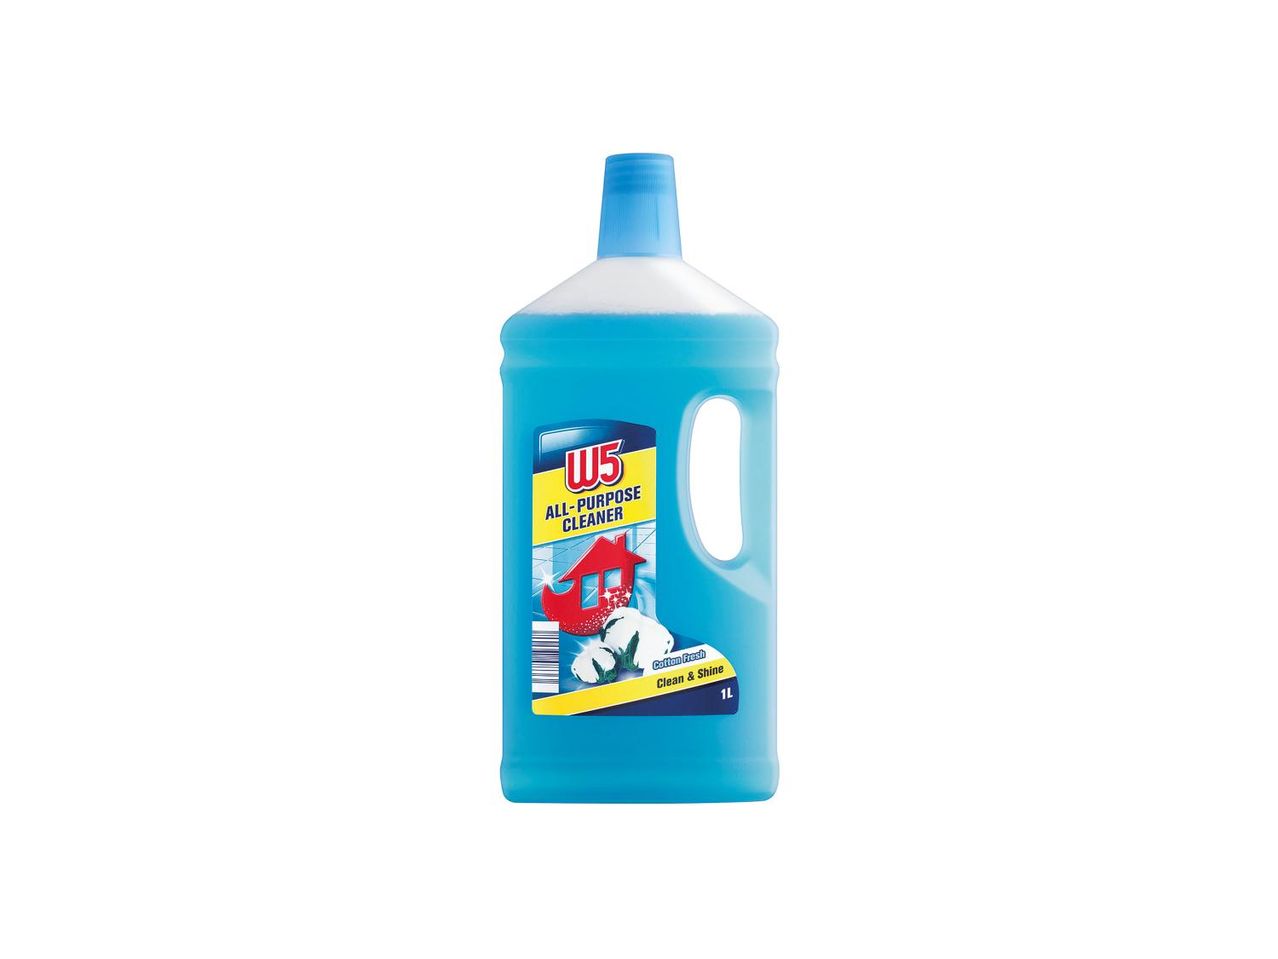 Go to full screen view: W5 Cotton Fresh All Purpose Cleaner - Image 1